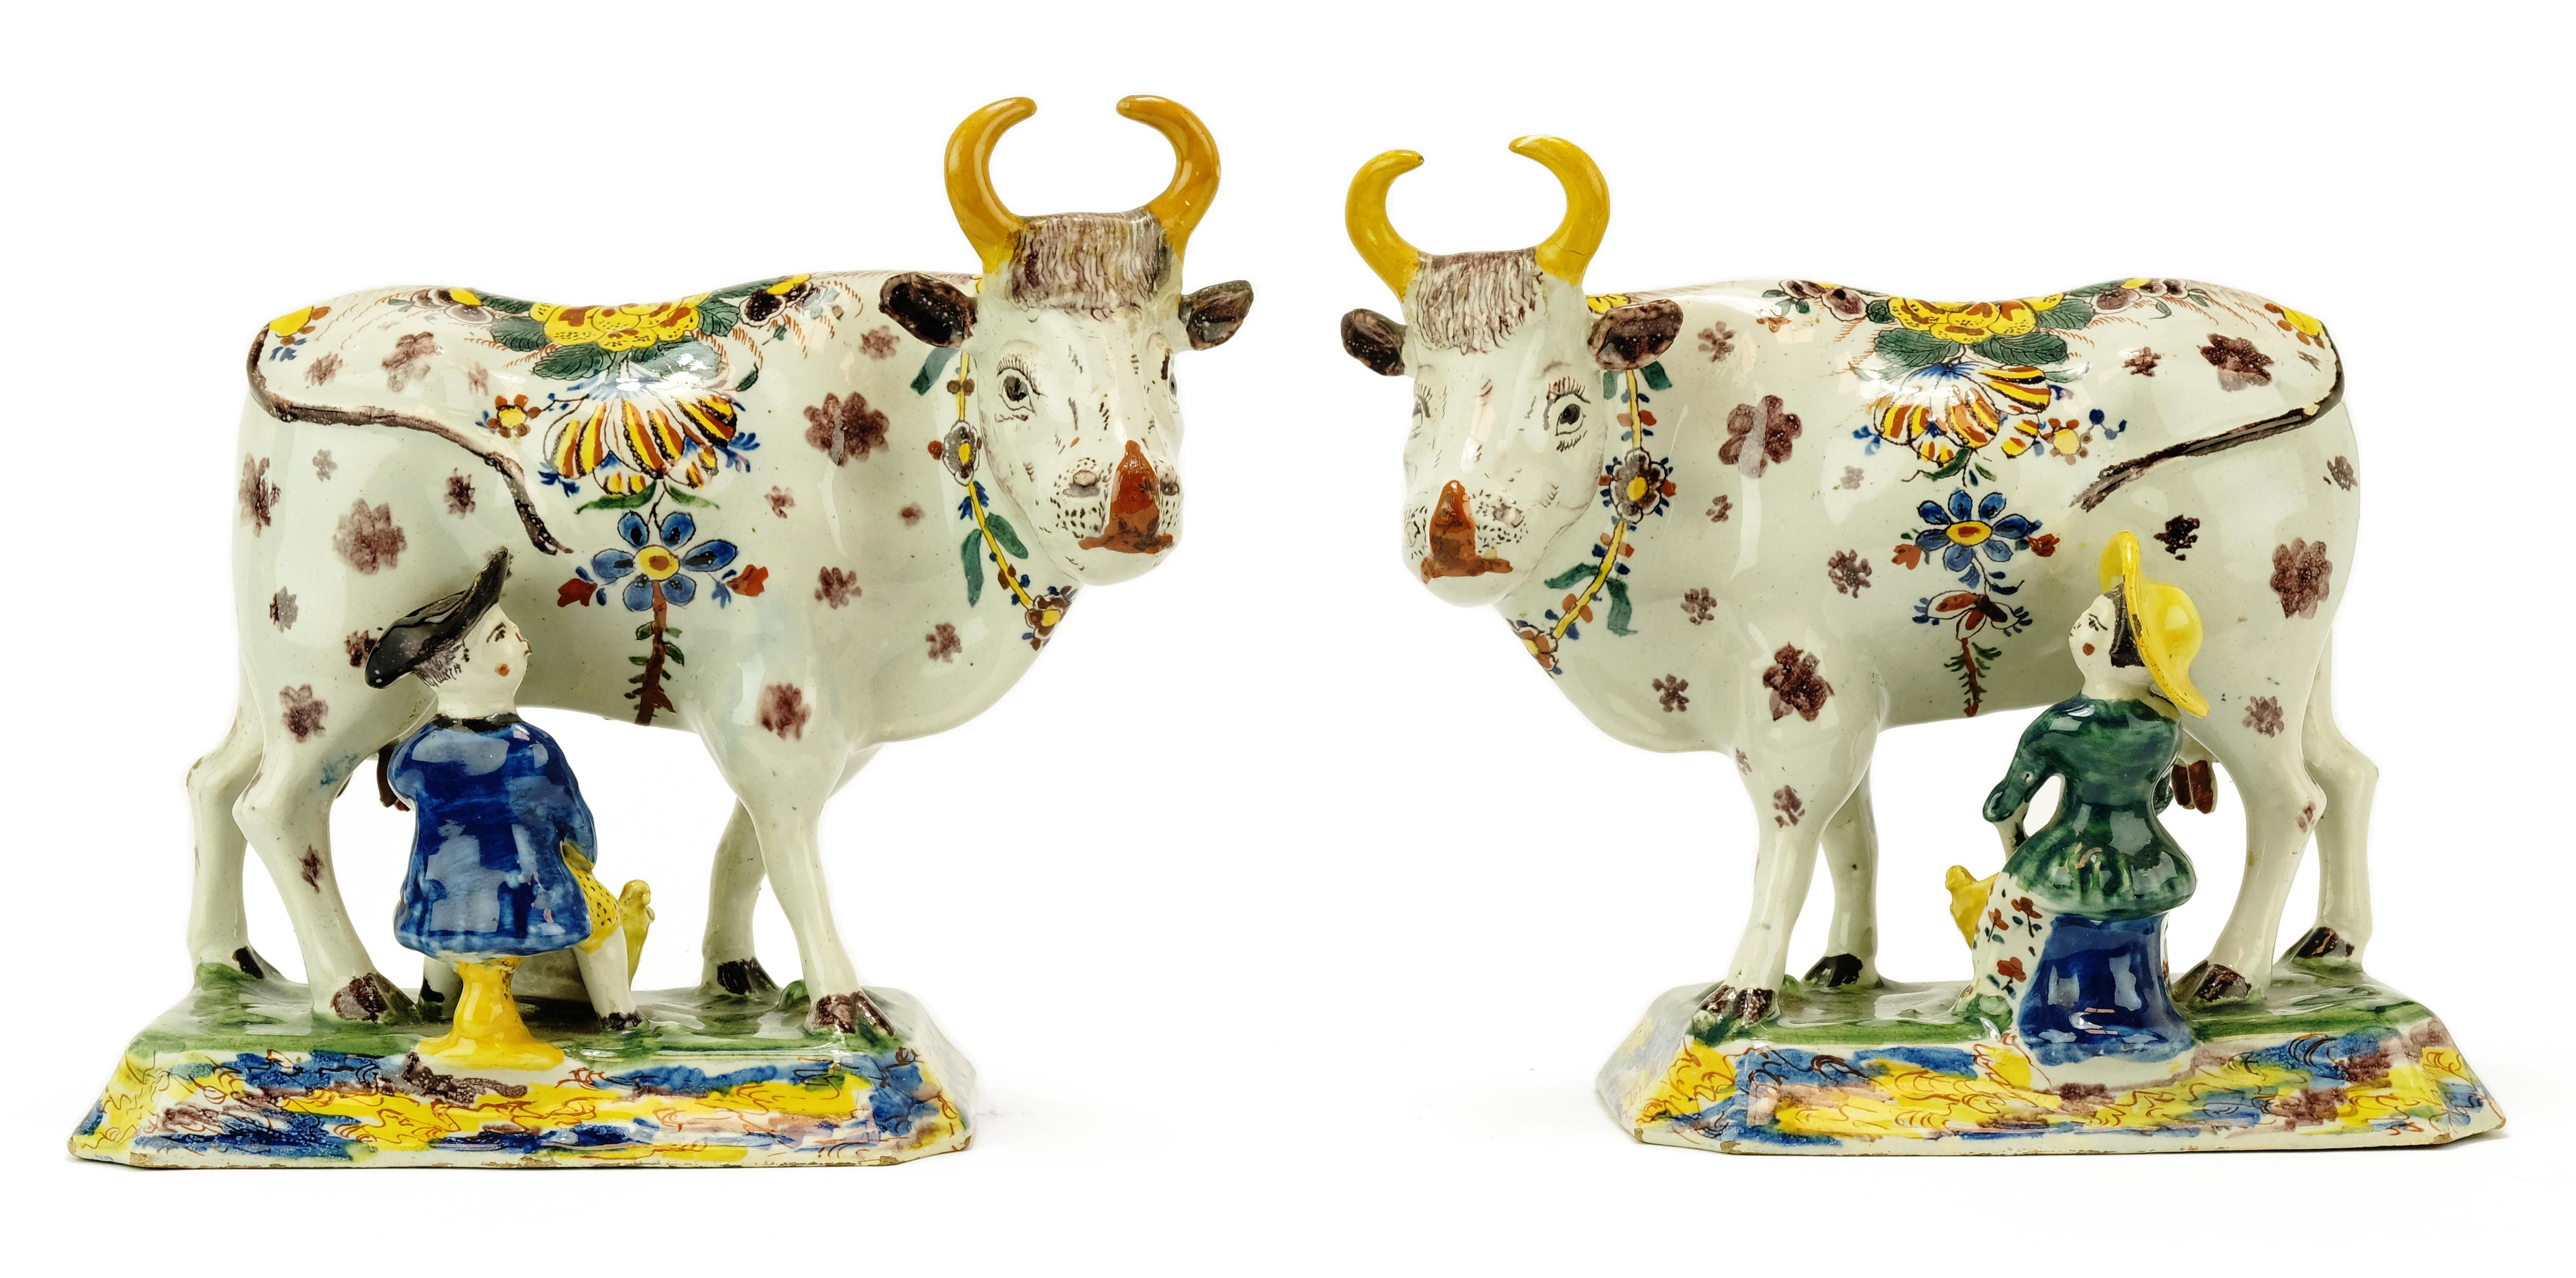 A pair of Dutch polychrome Delft pottery cow milkers